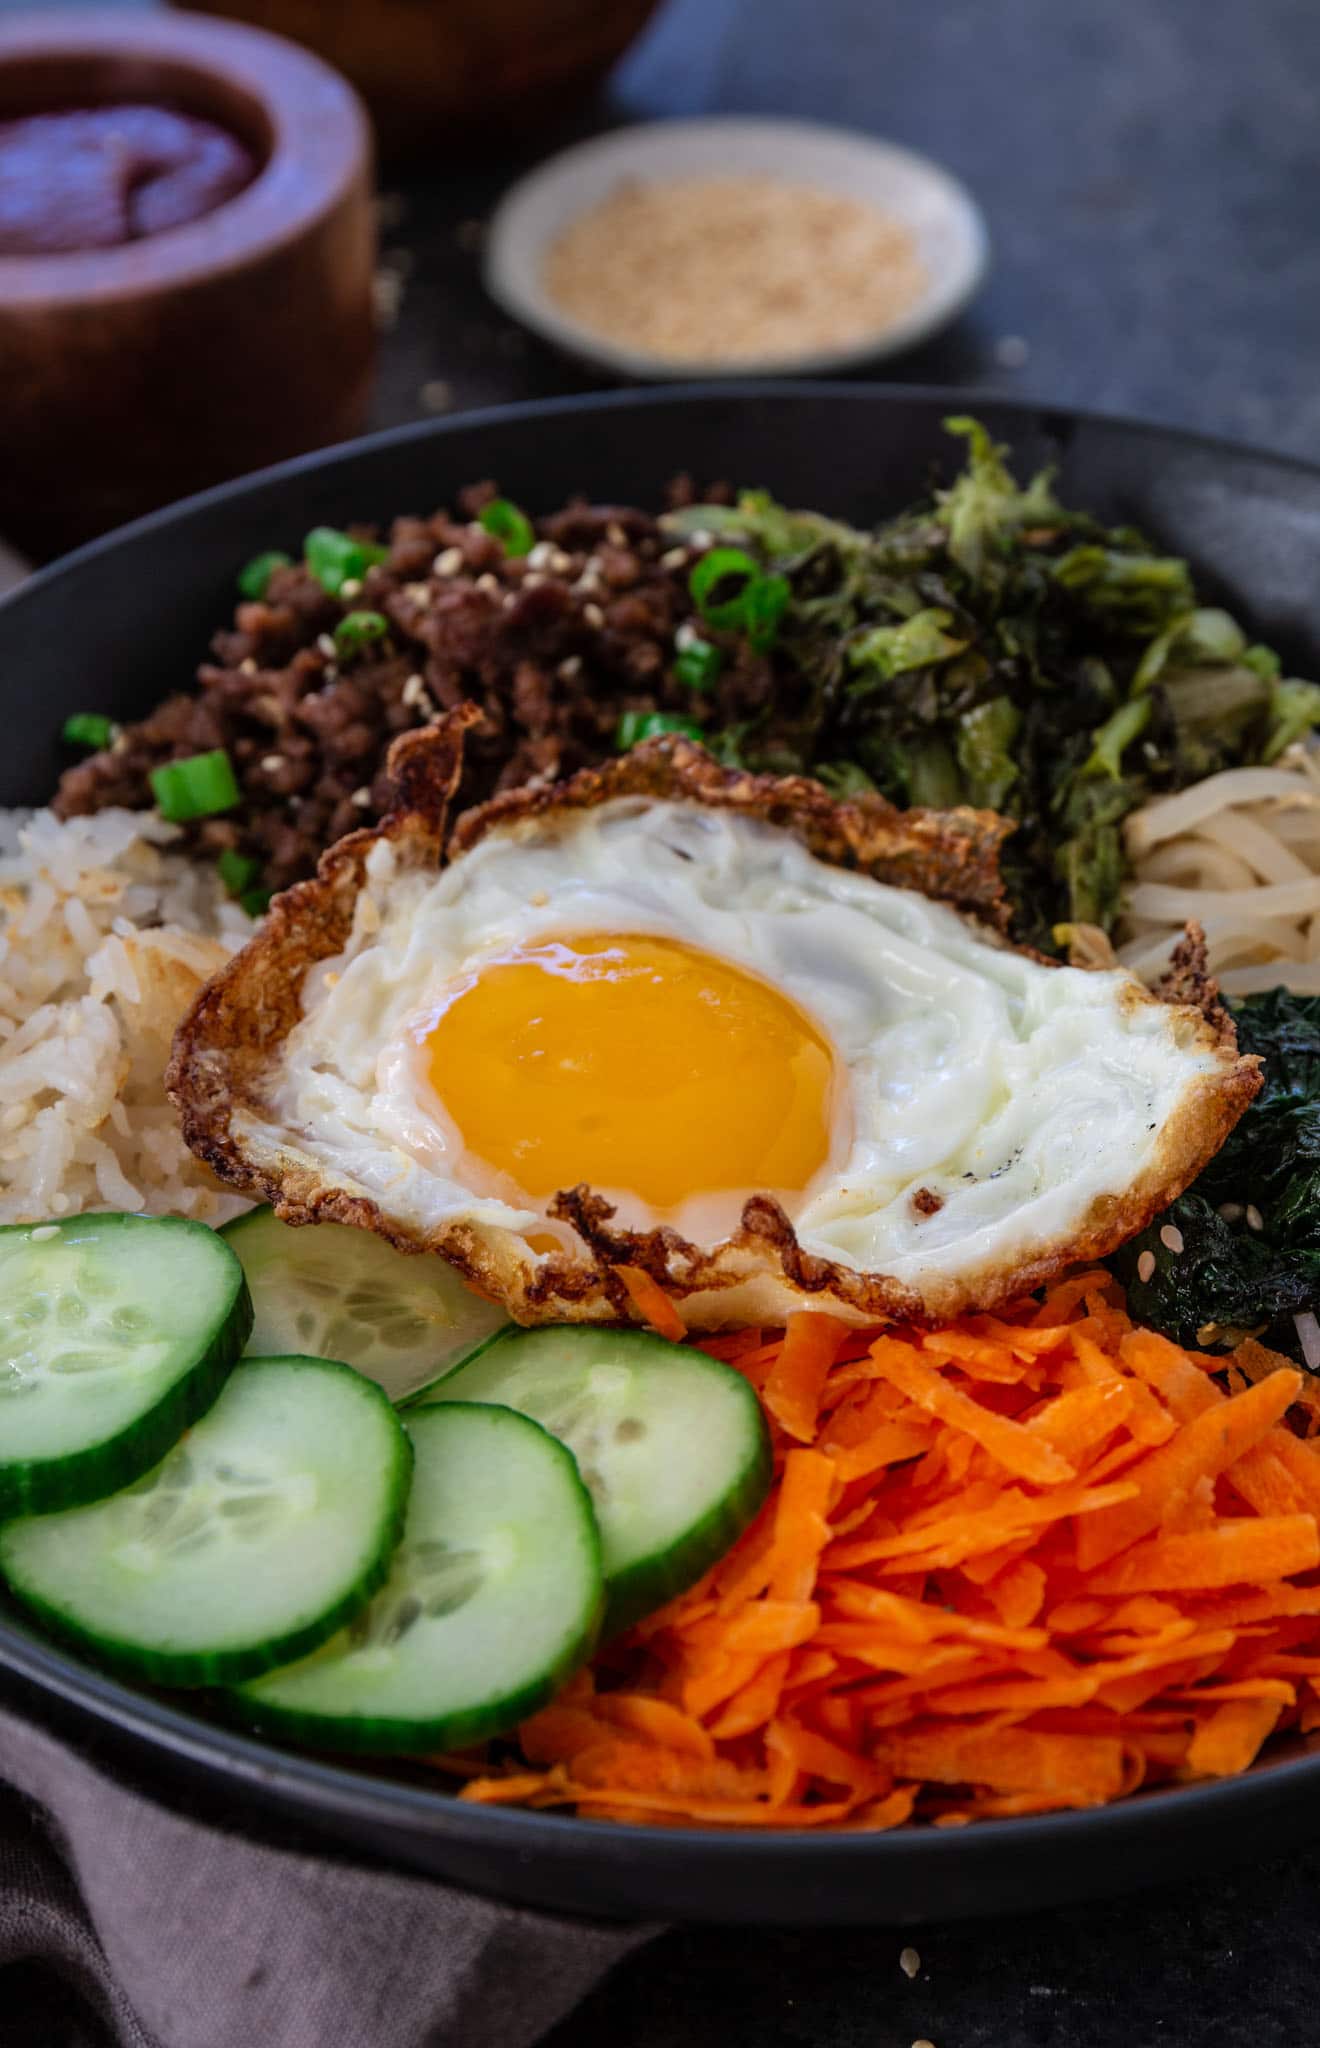 Bibimbap (Korean Beef Rice Bowl) | www.oliviascuisine.com | My version of Bibimbap, a popular Korean rice dish, takes a few shortcuts for convenience! The good news is that it’s done in less than 30 minutes without compromising flavor. Serve with a fried egg on top for that extra wow factor! (Recipe and food photography by @oliviascuisine.)